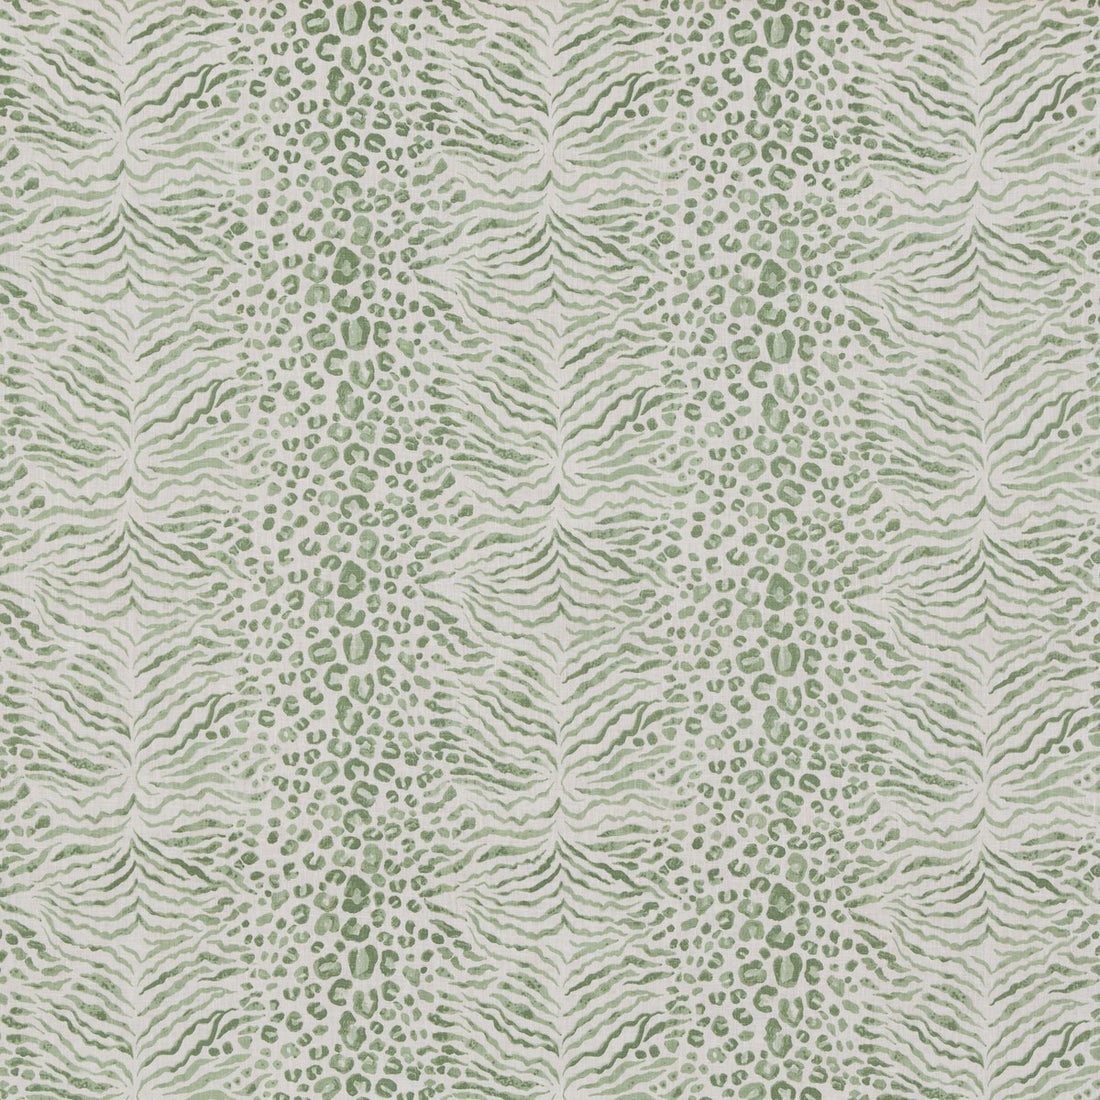 Chatto fabric in green color - pattern BP10952.735.0 - by G P &amp; J Baker in the Ashmore collection